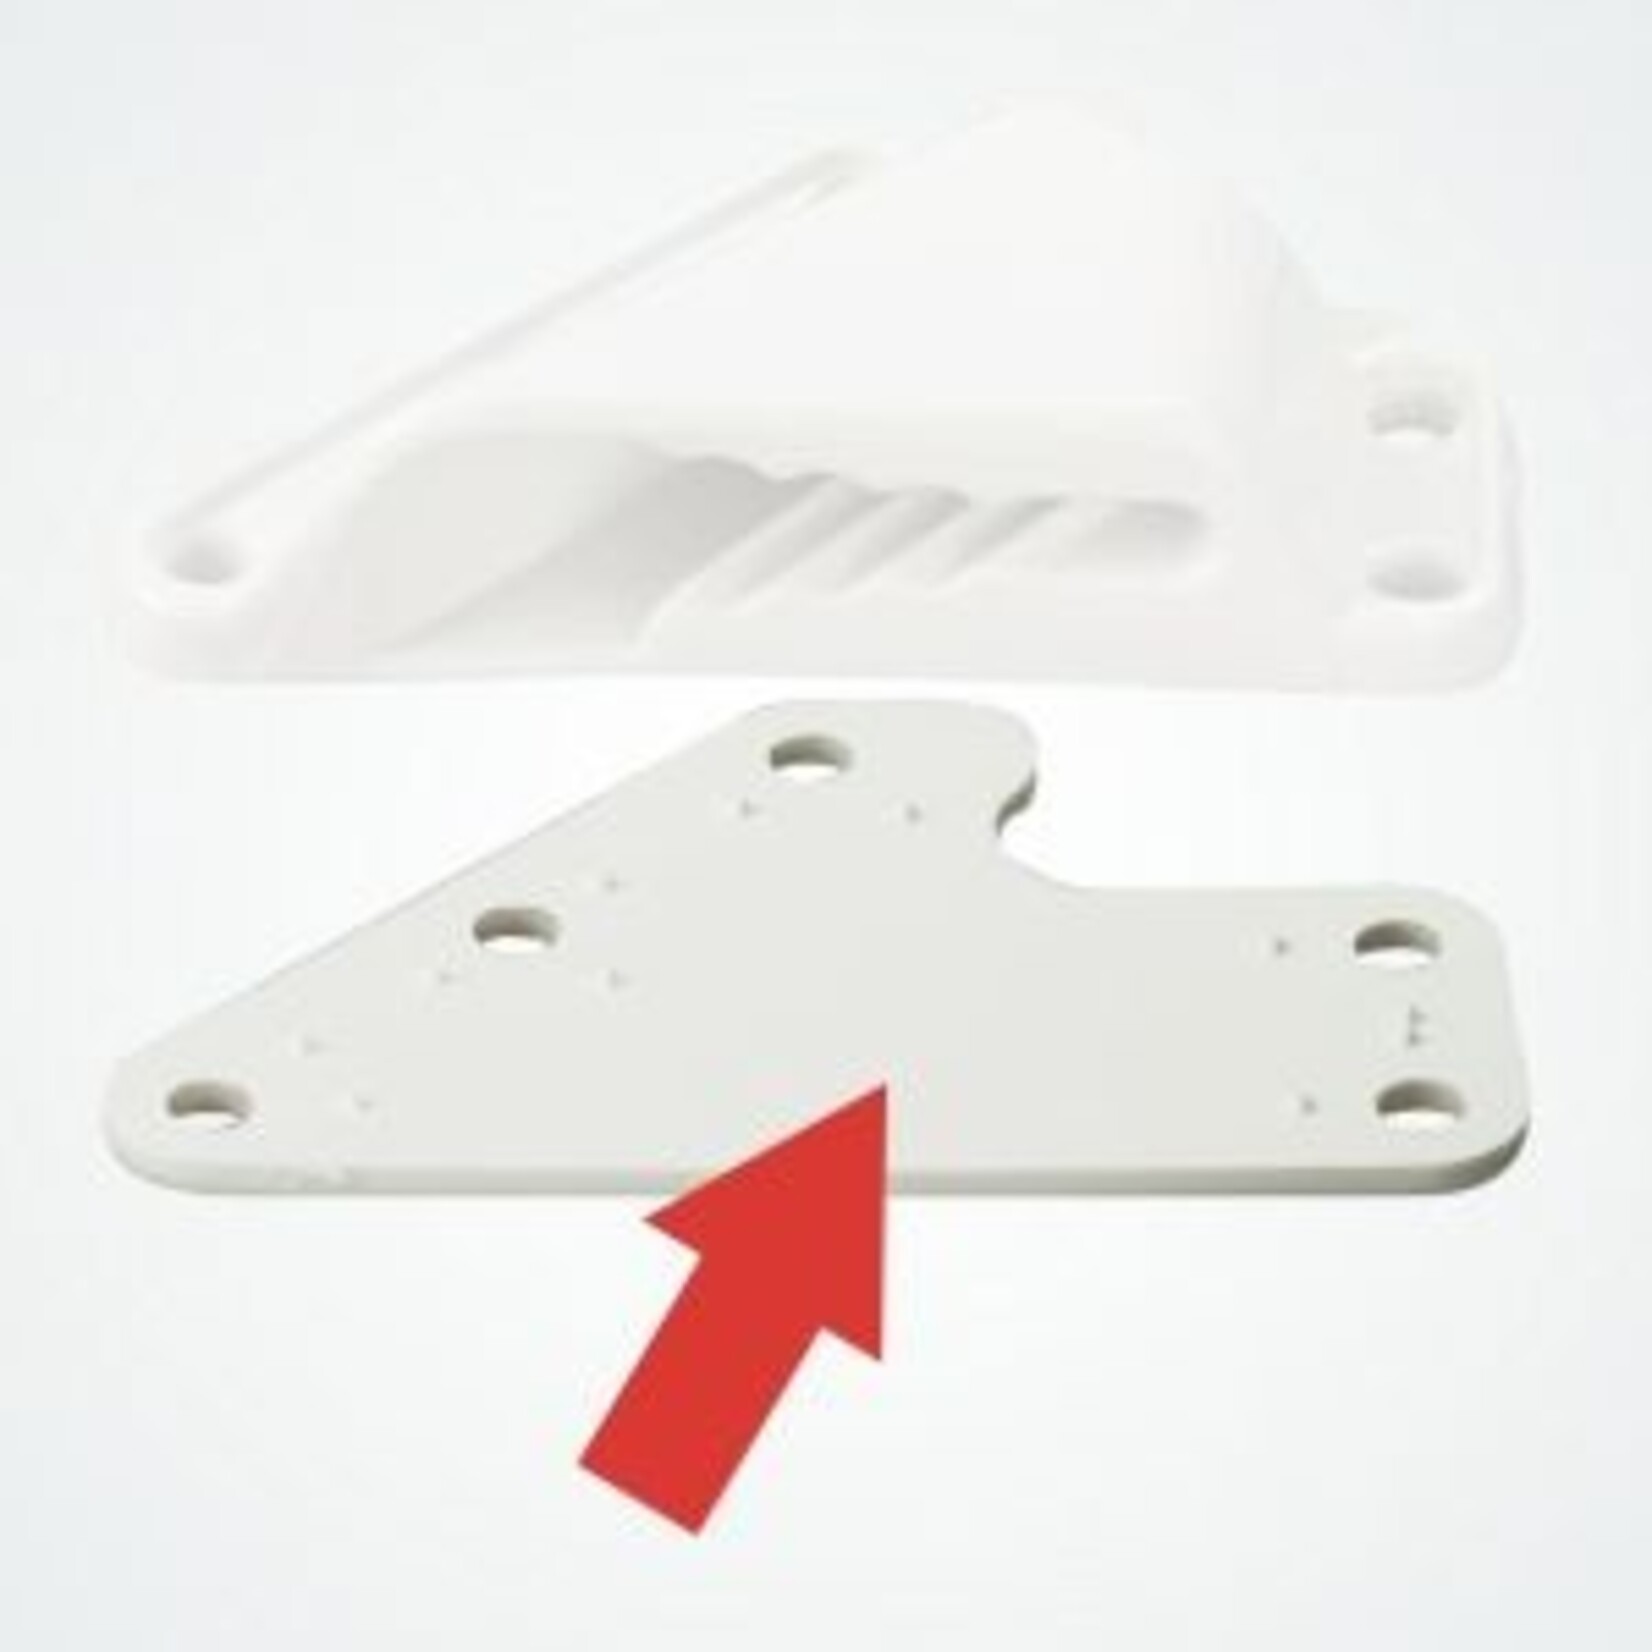 Clamcleat Backplate for CL233 - Loose